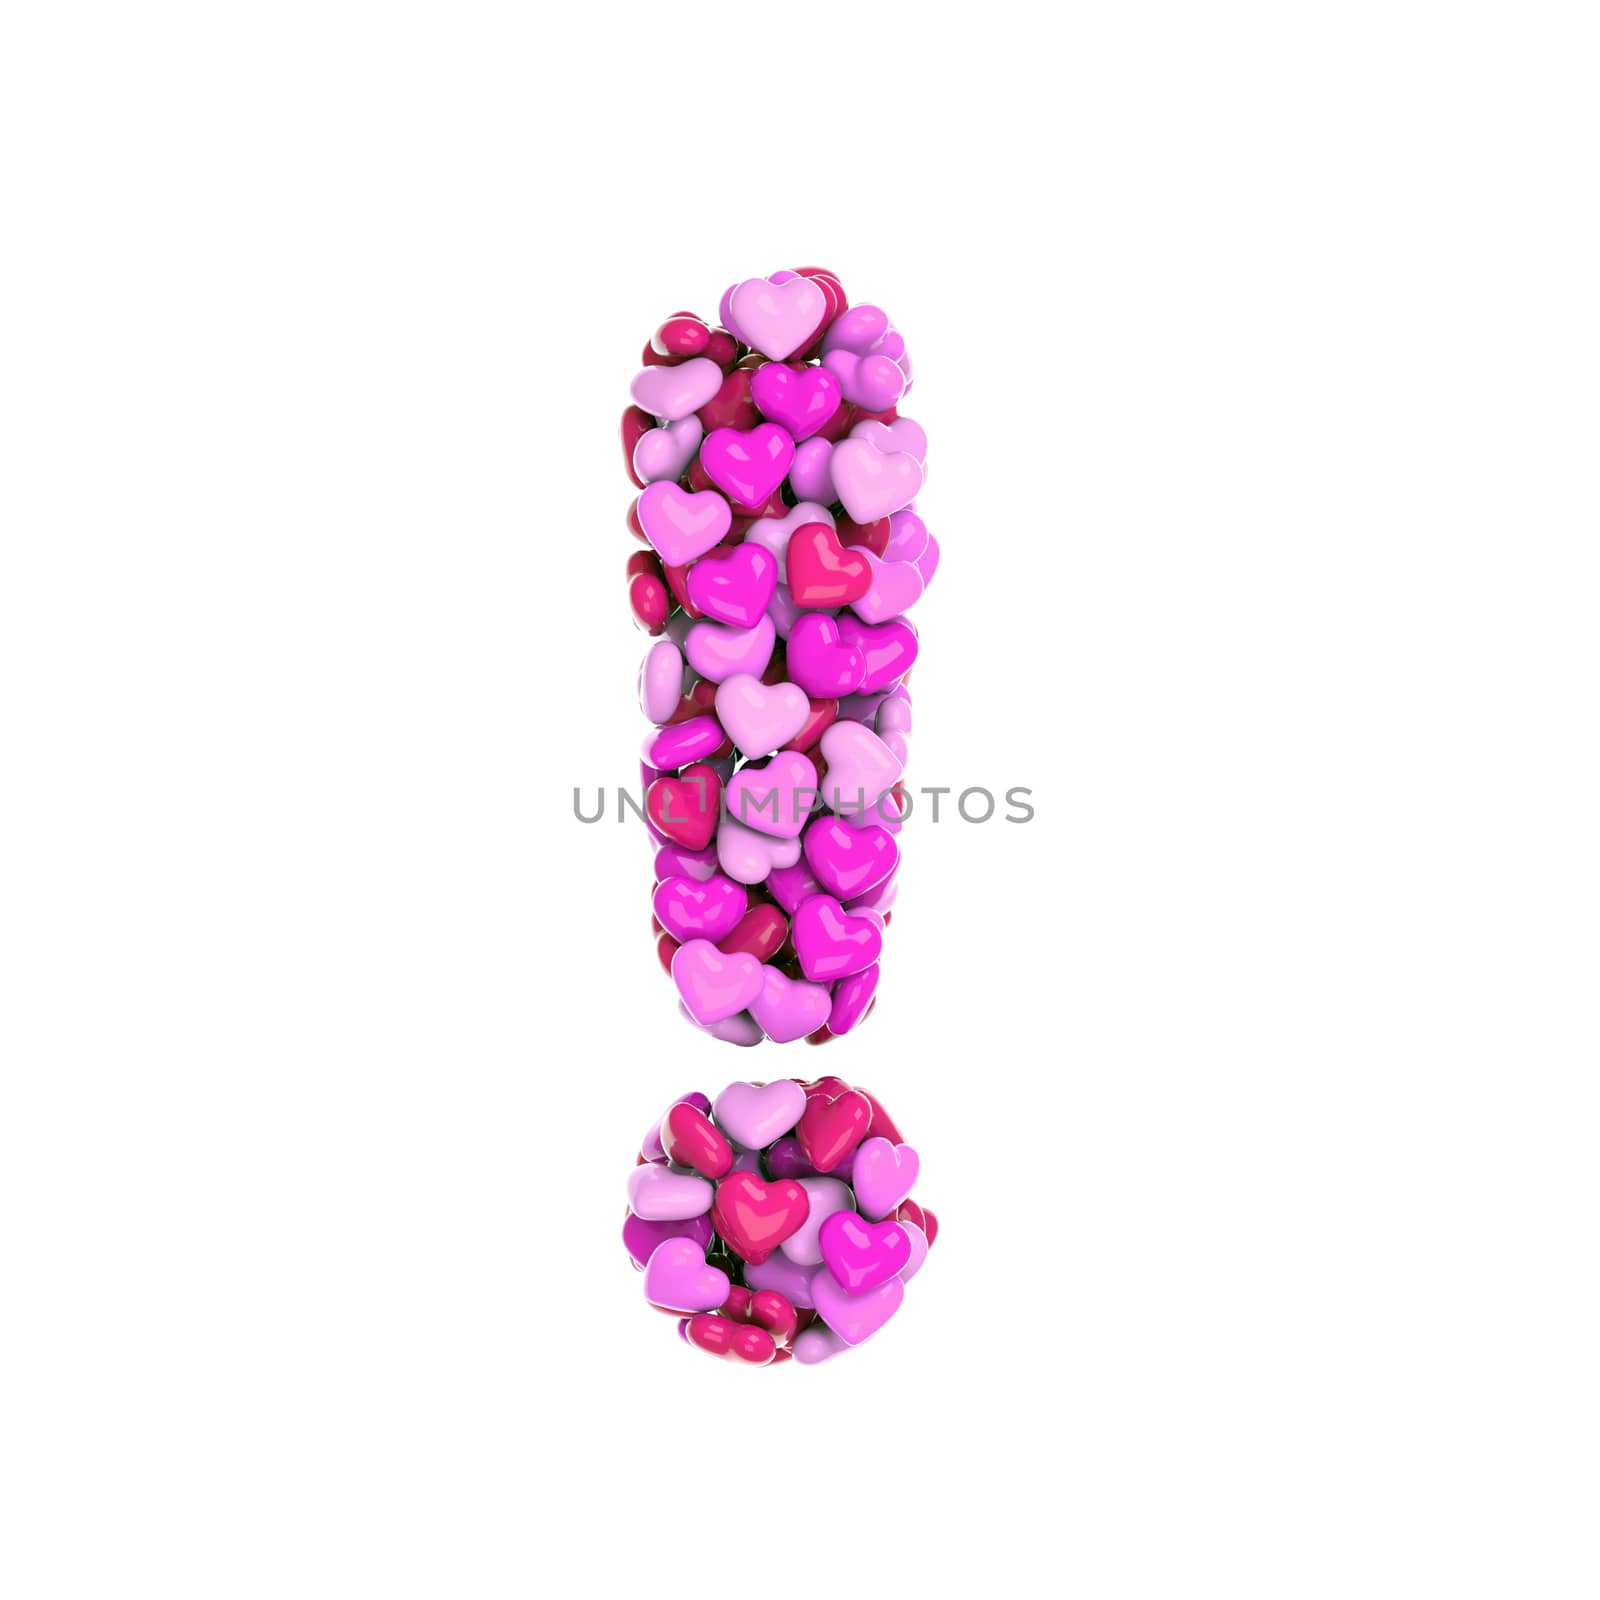 Valentine exclamation point - 3d pink hearts symbol - Love, passion or wedding concept by chrisroll